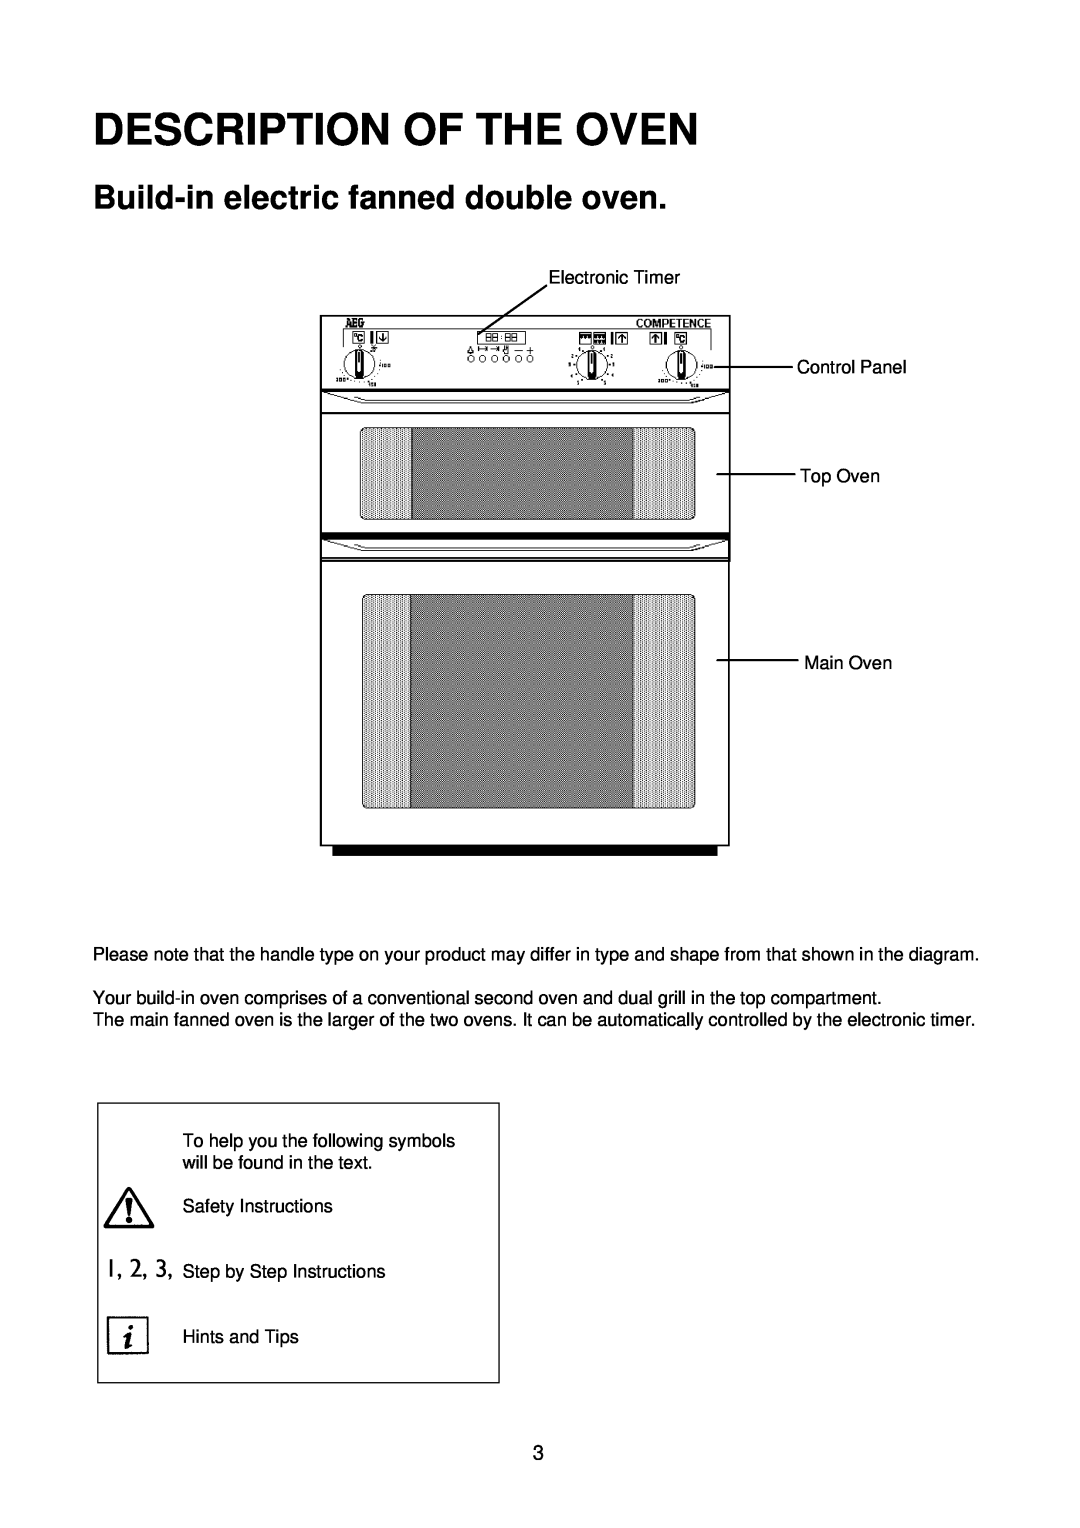 Electrolux D2160 installation instructions Description Of The Oven, Build-in electric fanned double oven 